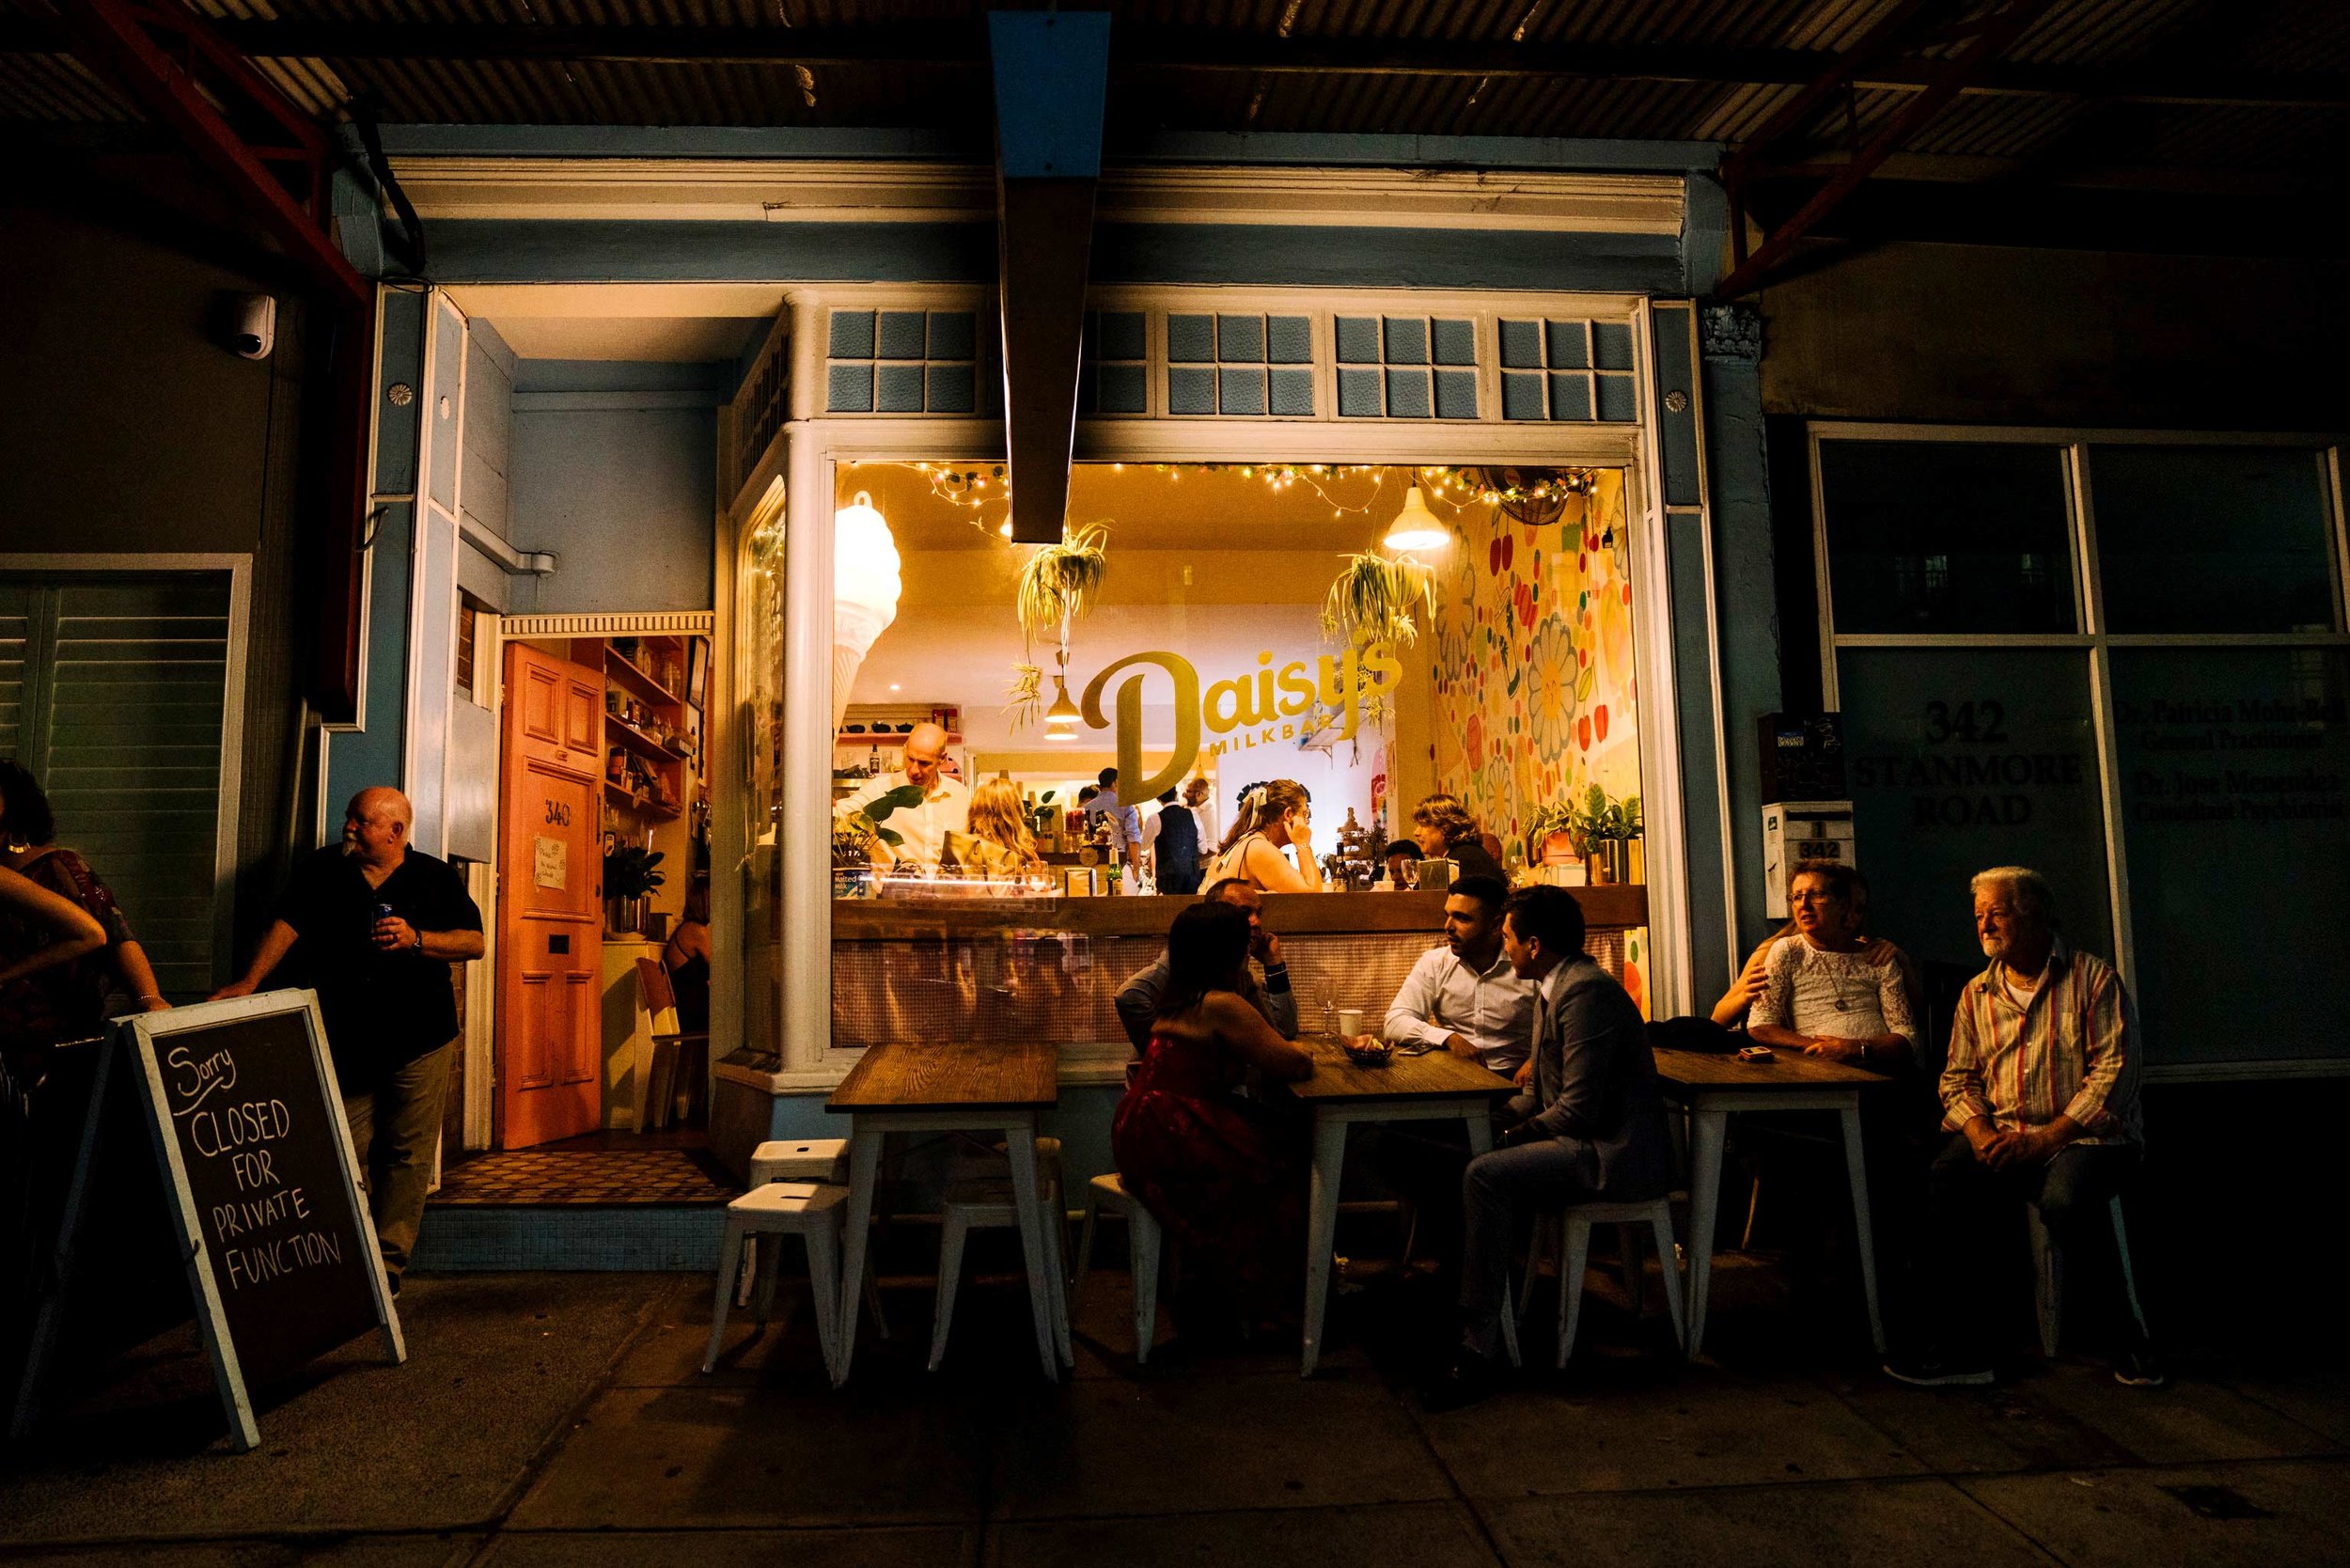 View of Daisy's Milk bar at night with wedding guests out front